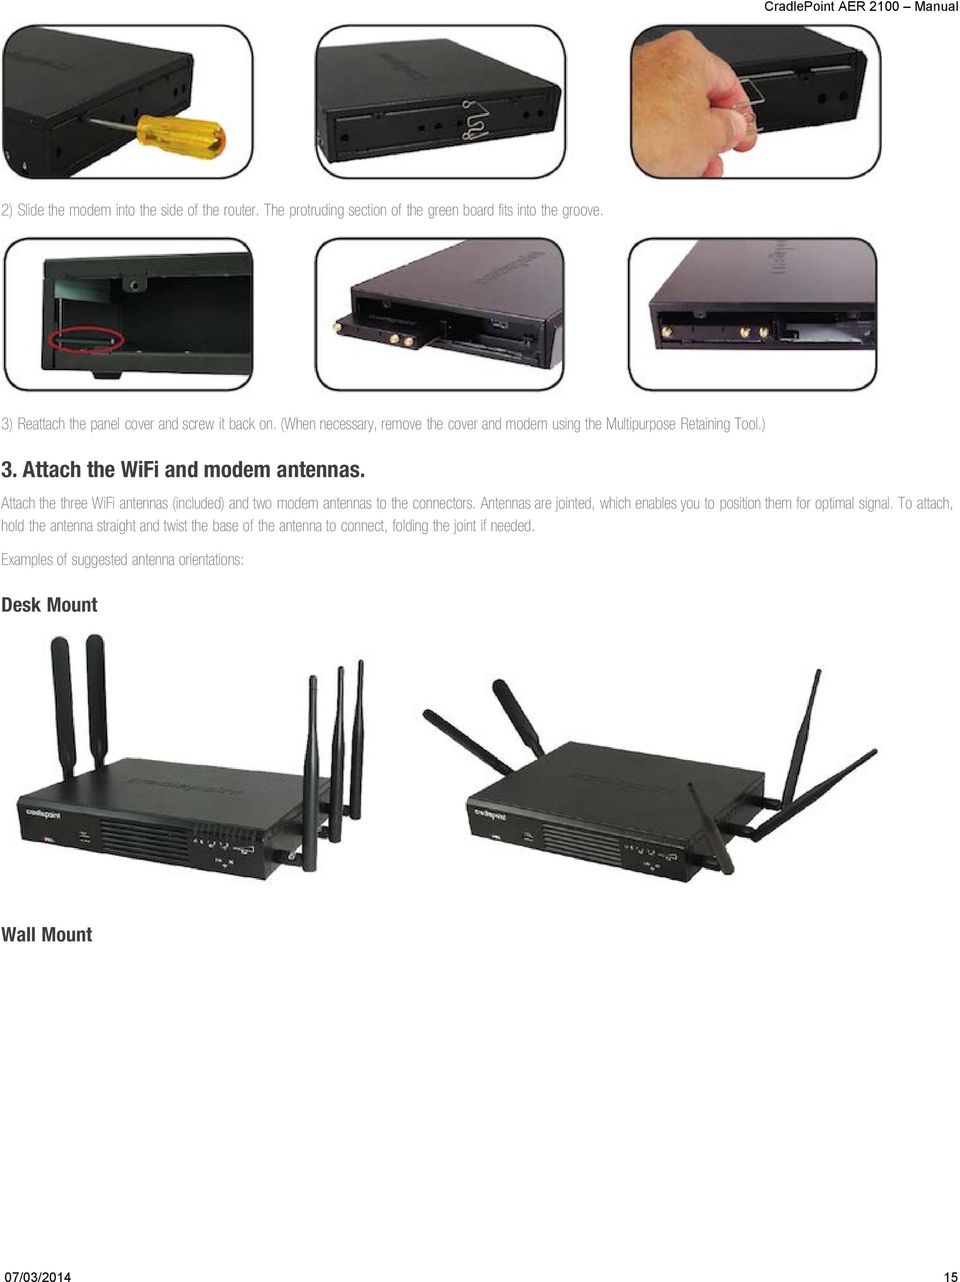 Attach the WiFi and modem antennas. Attach the three WiFi antennas (included) and two modem antennas to the connectors.